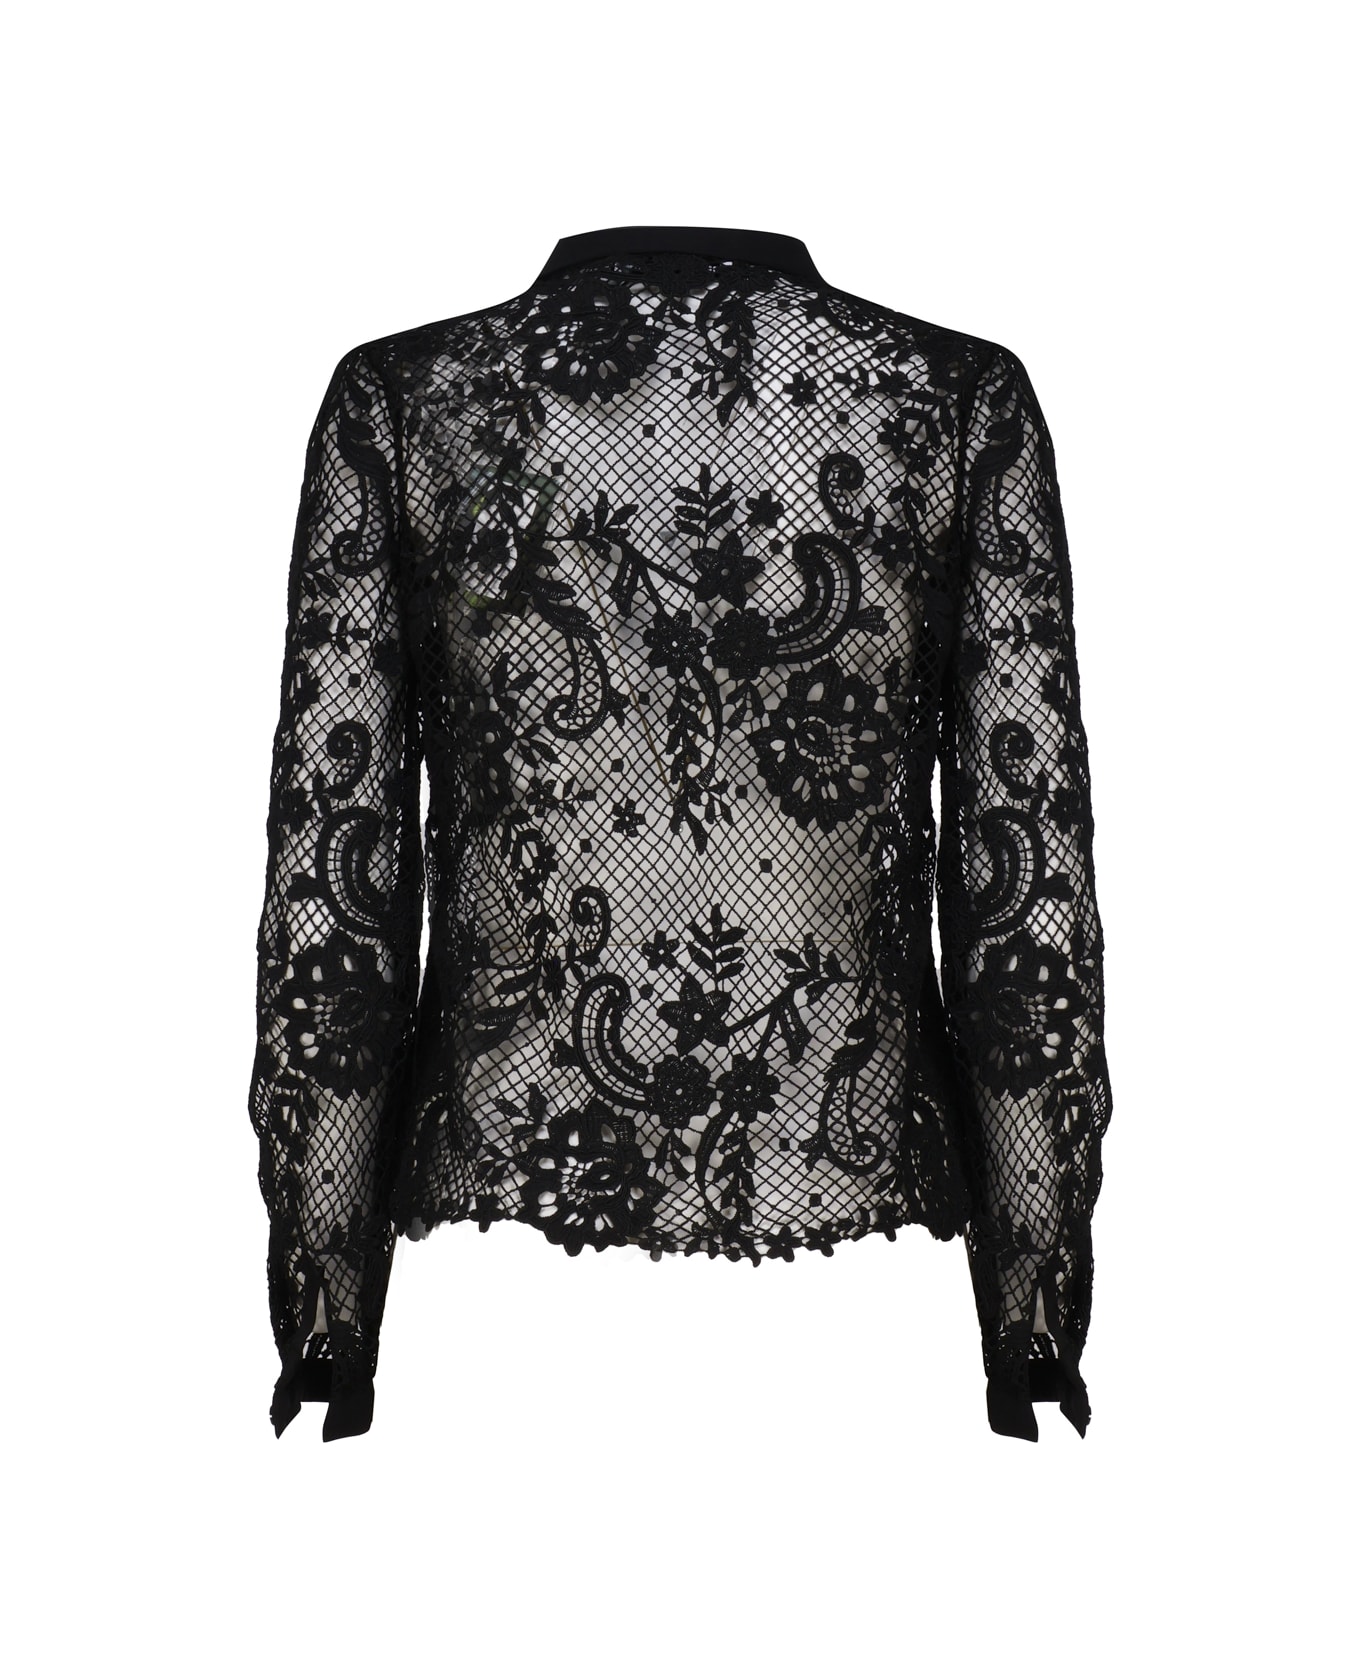 self-portrait Lace Shirt With Floral Pattern - Black ブラウス